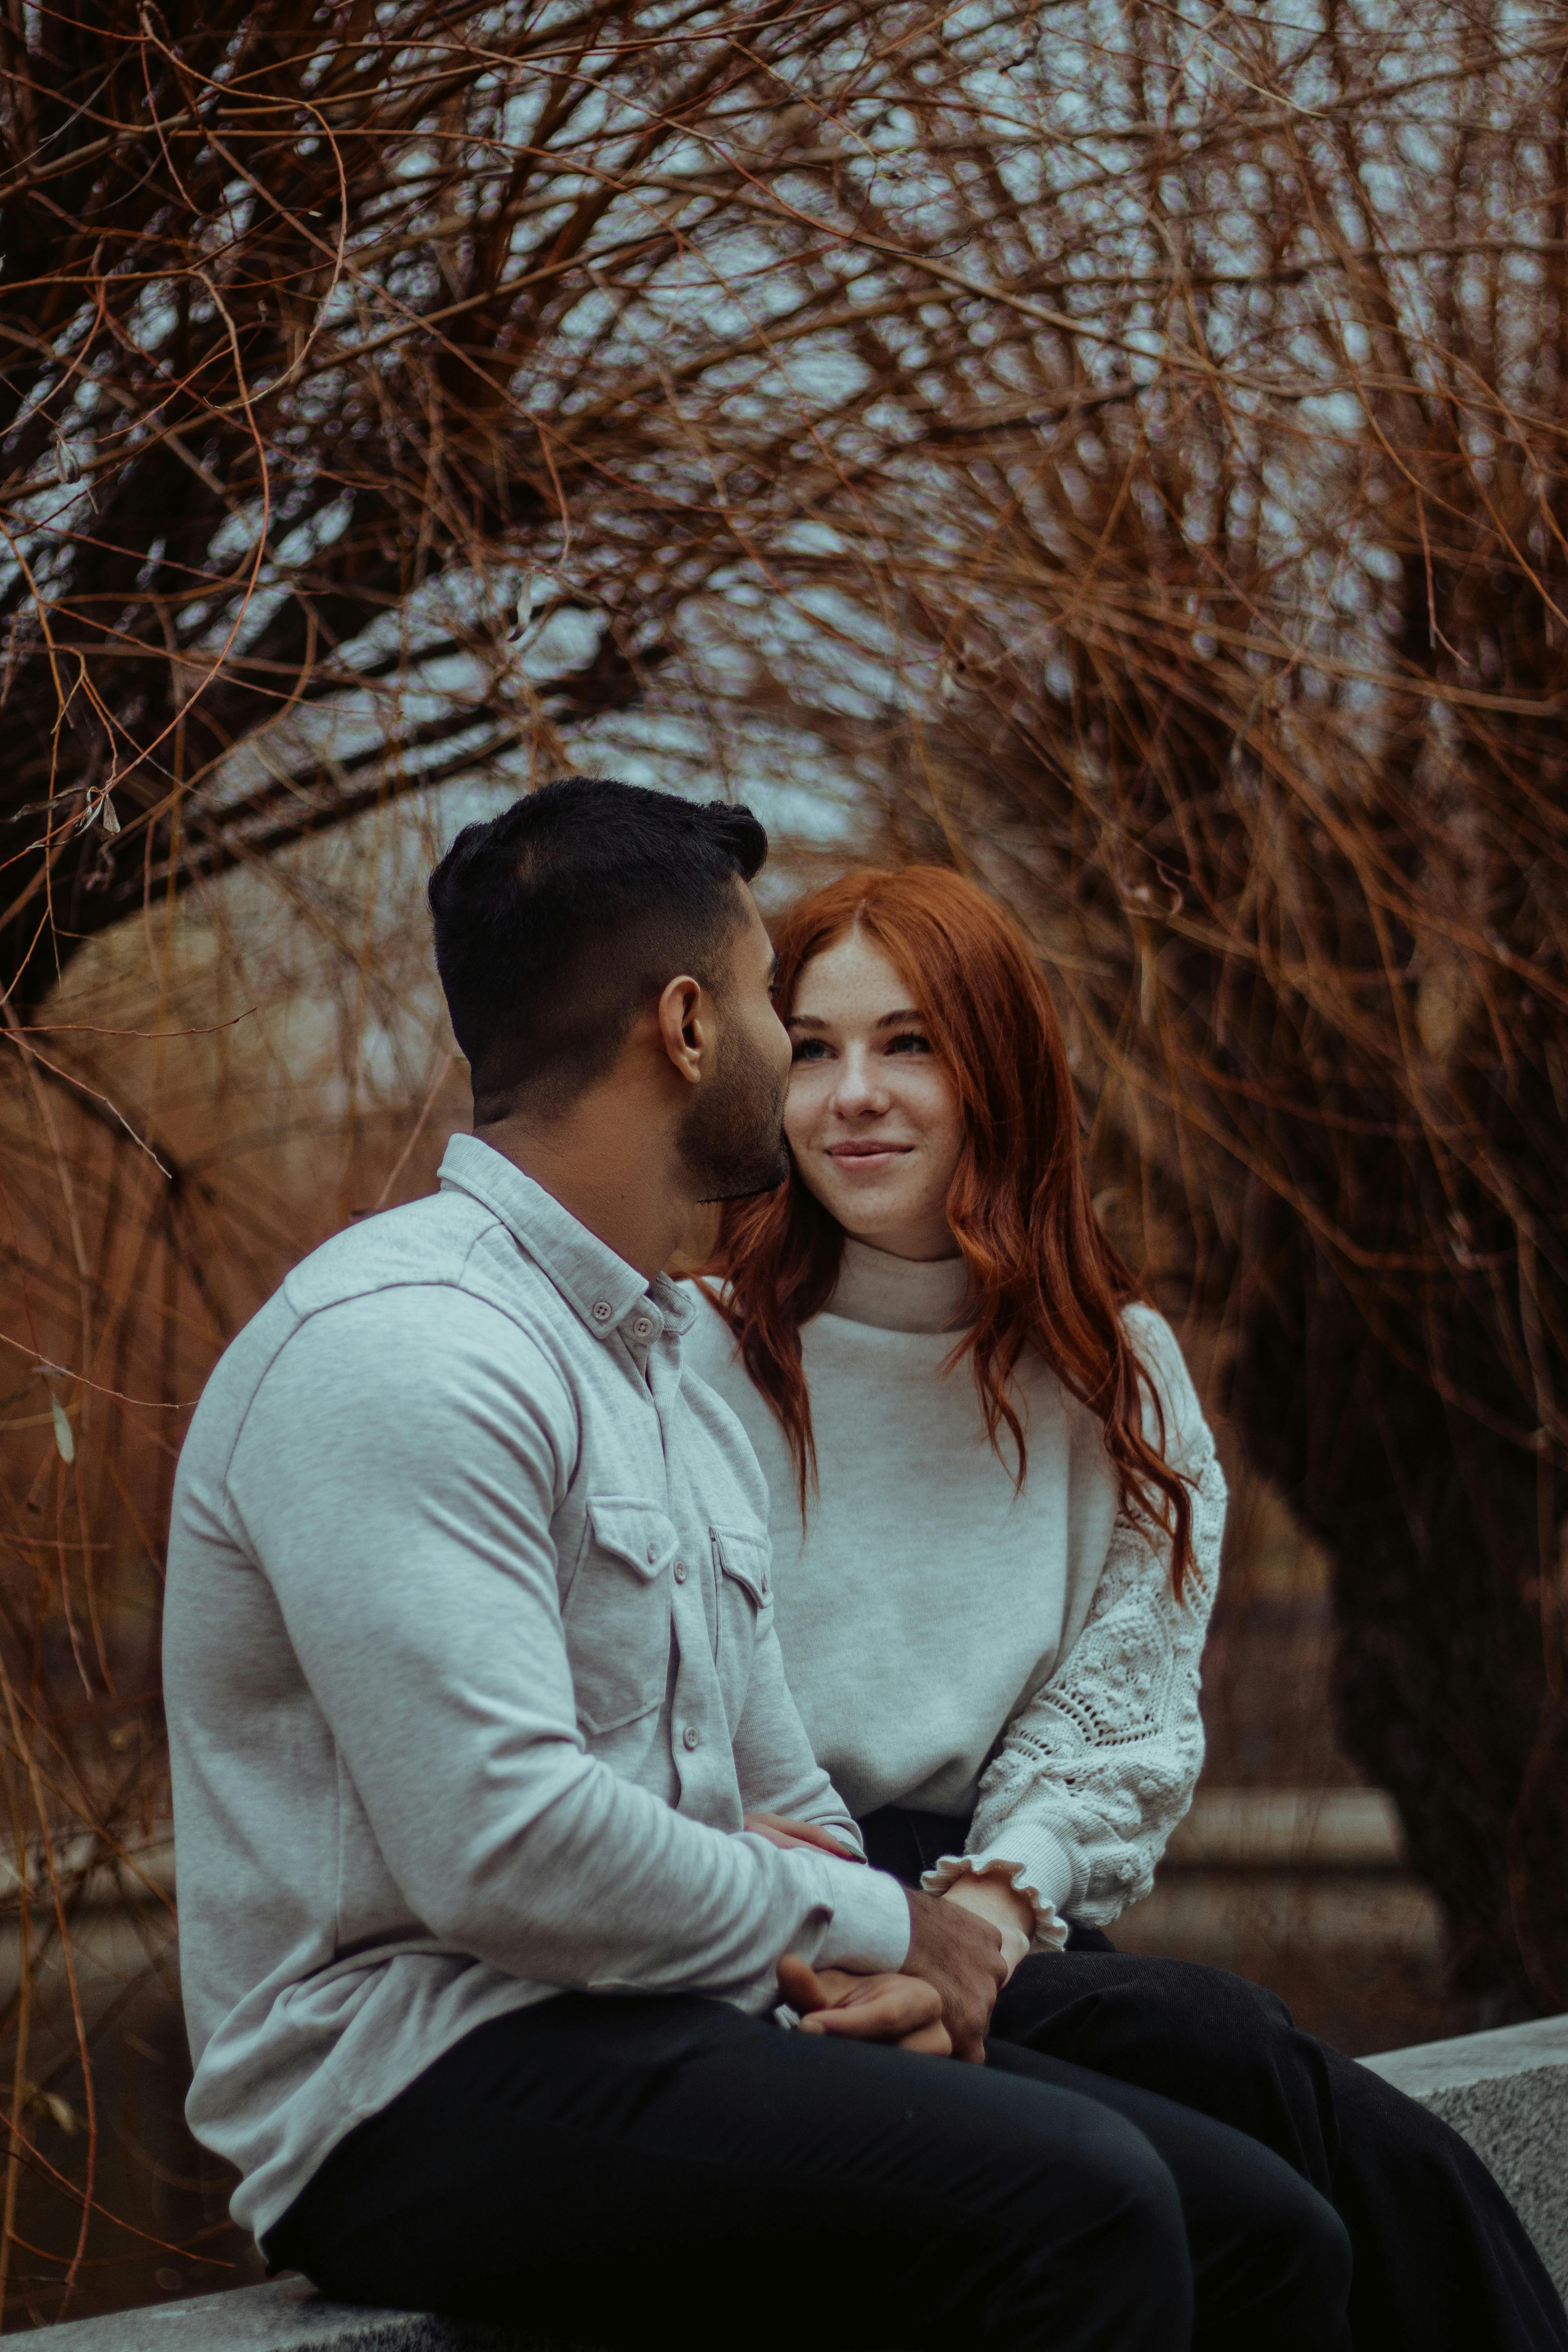 A couple sitting together on a bench in a park | Source: Pexels